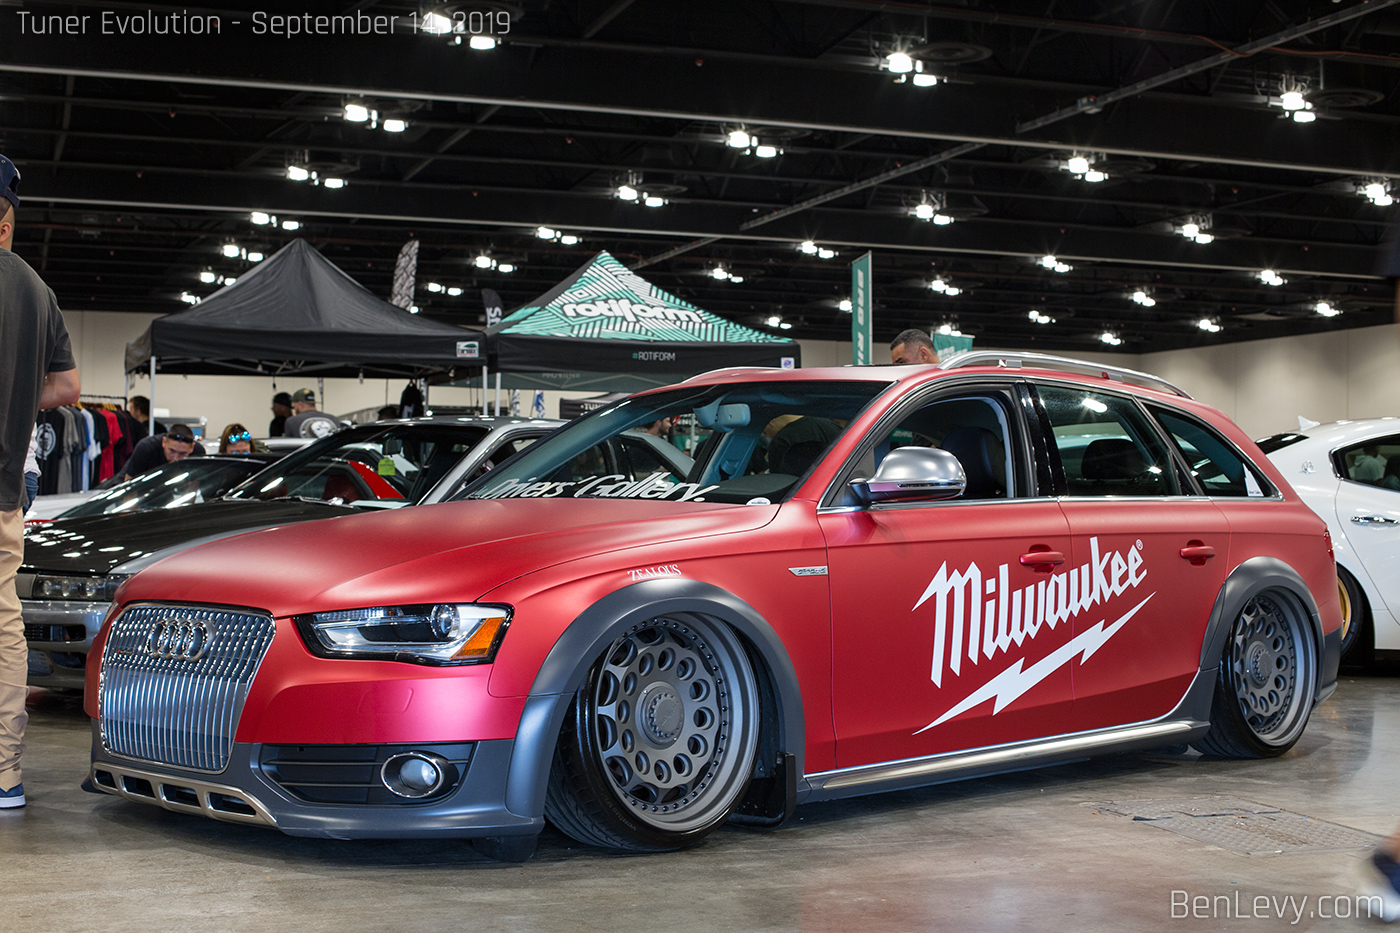 Audi Allroad with Rotiform HVN wheels